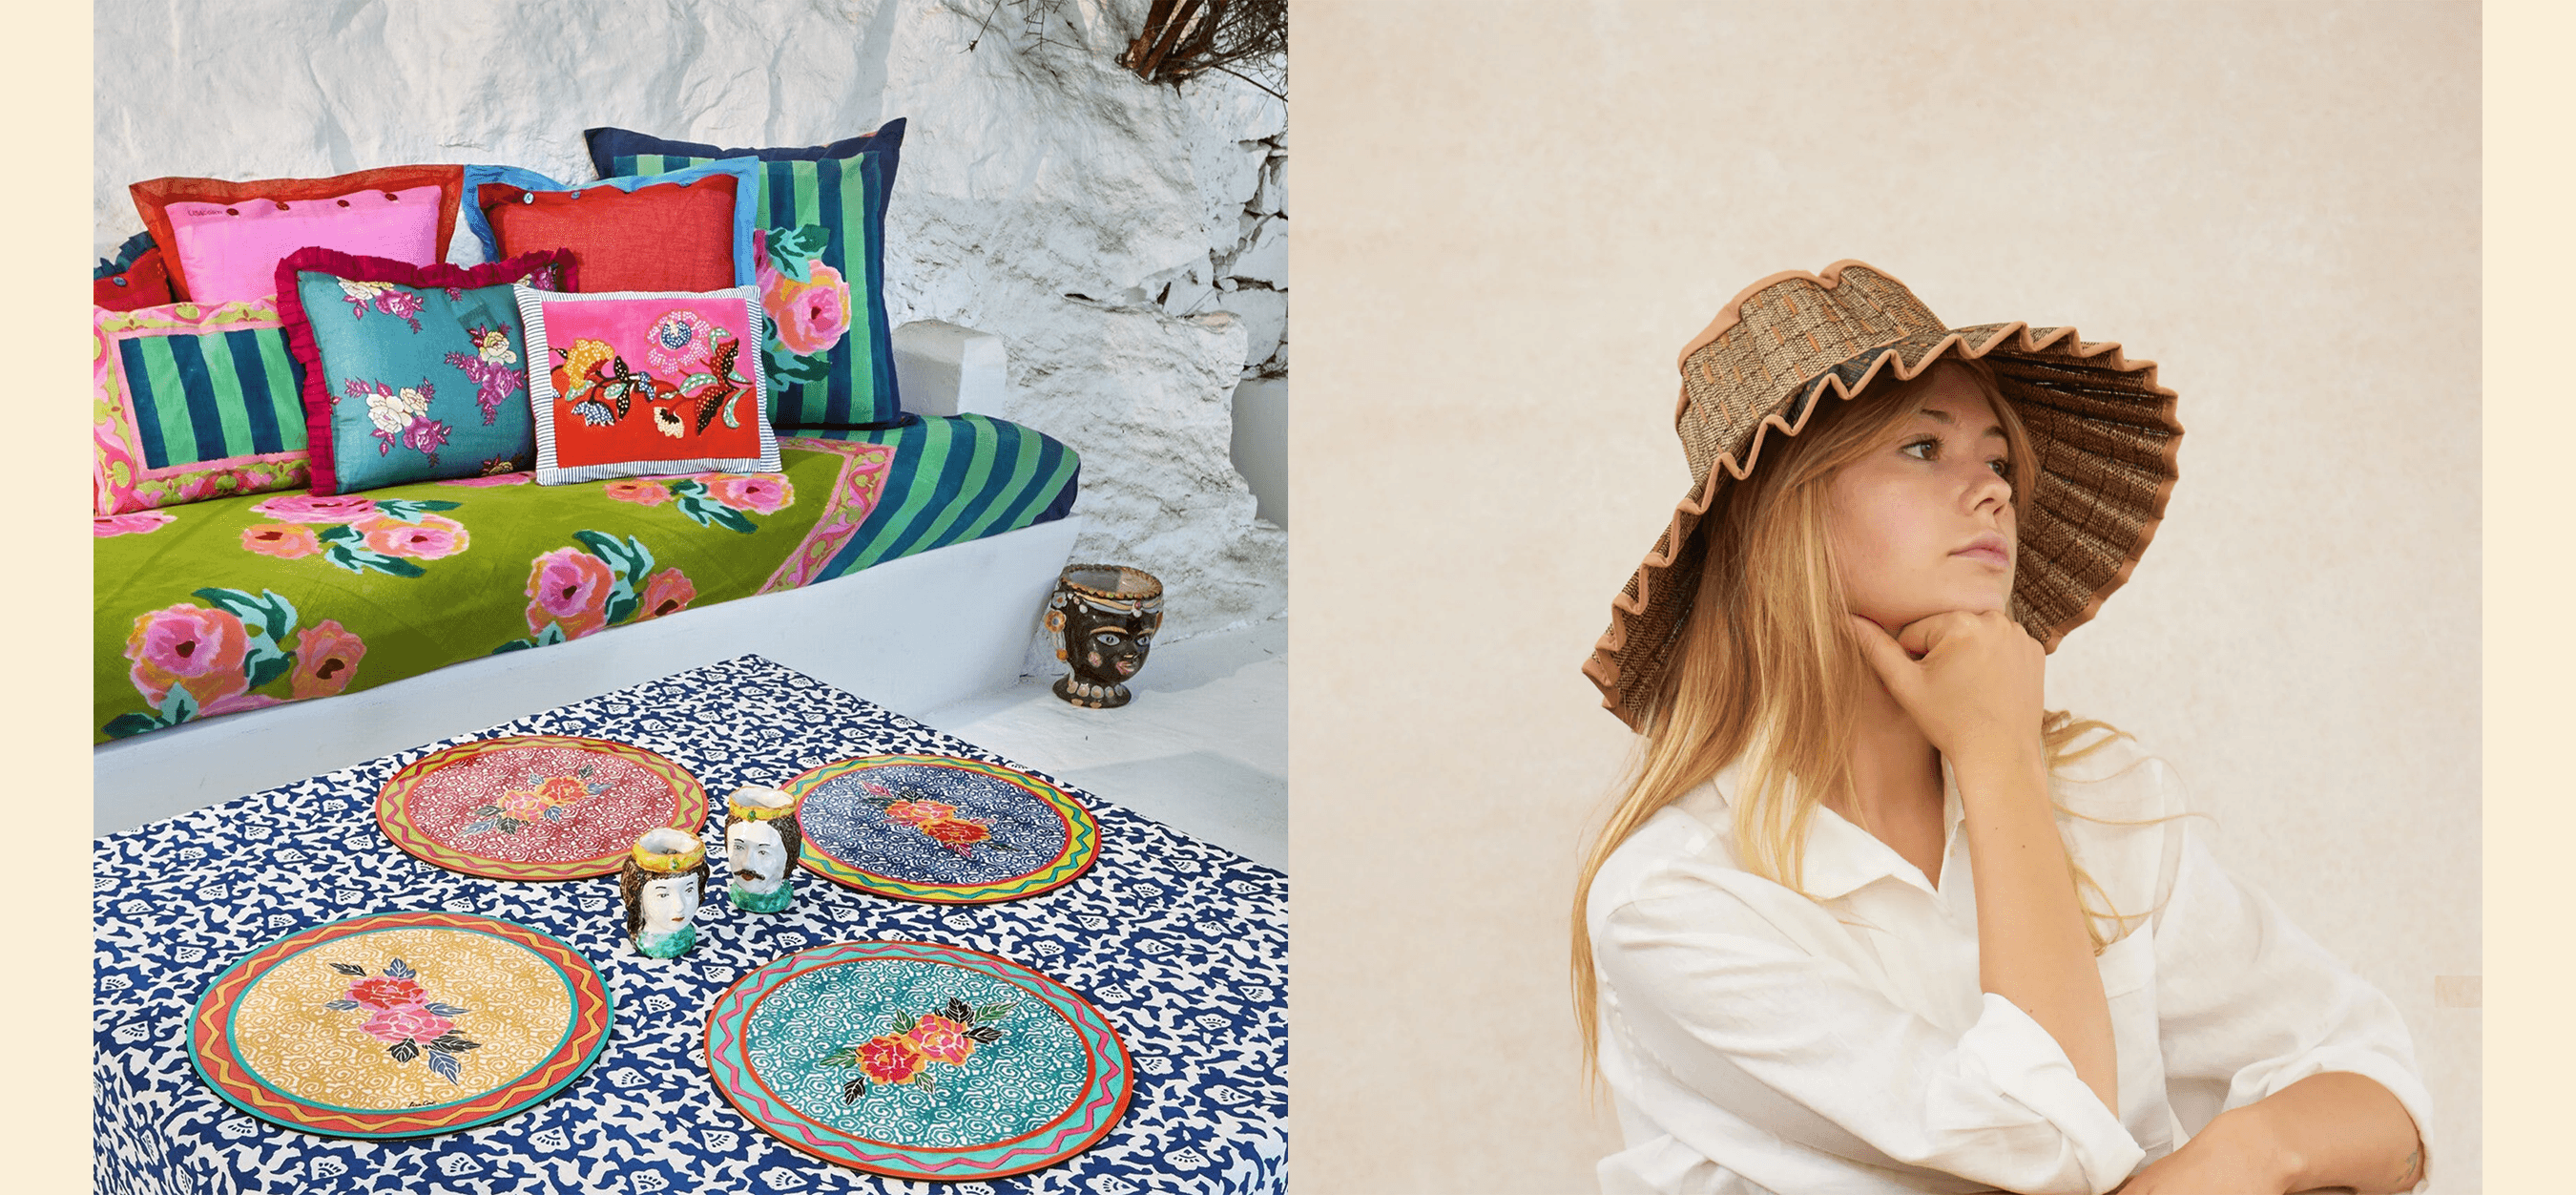 things that make mom's lives easier like mix and match placemats and hats that foldup